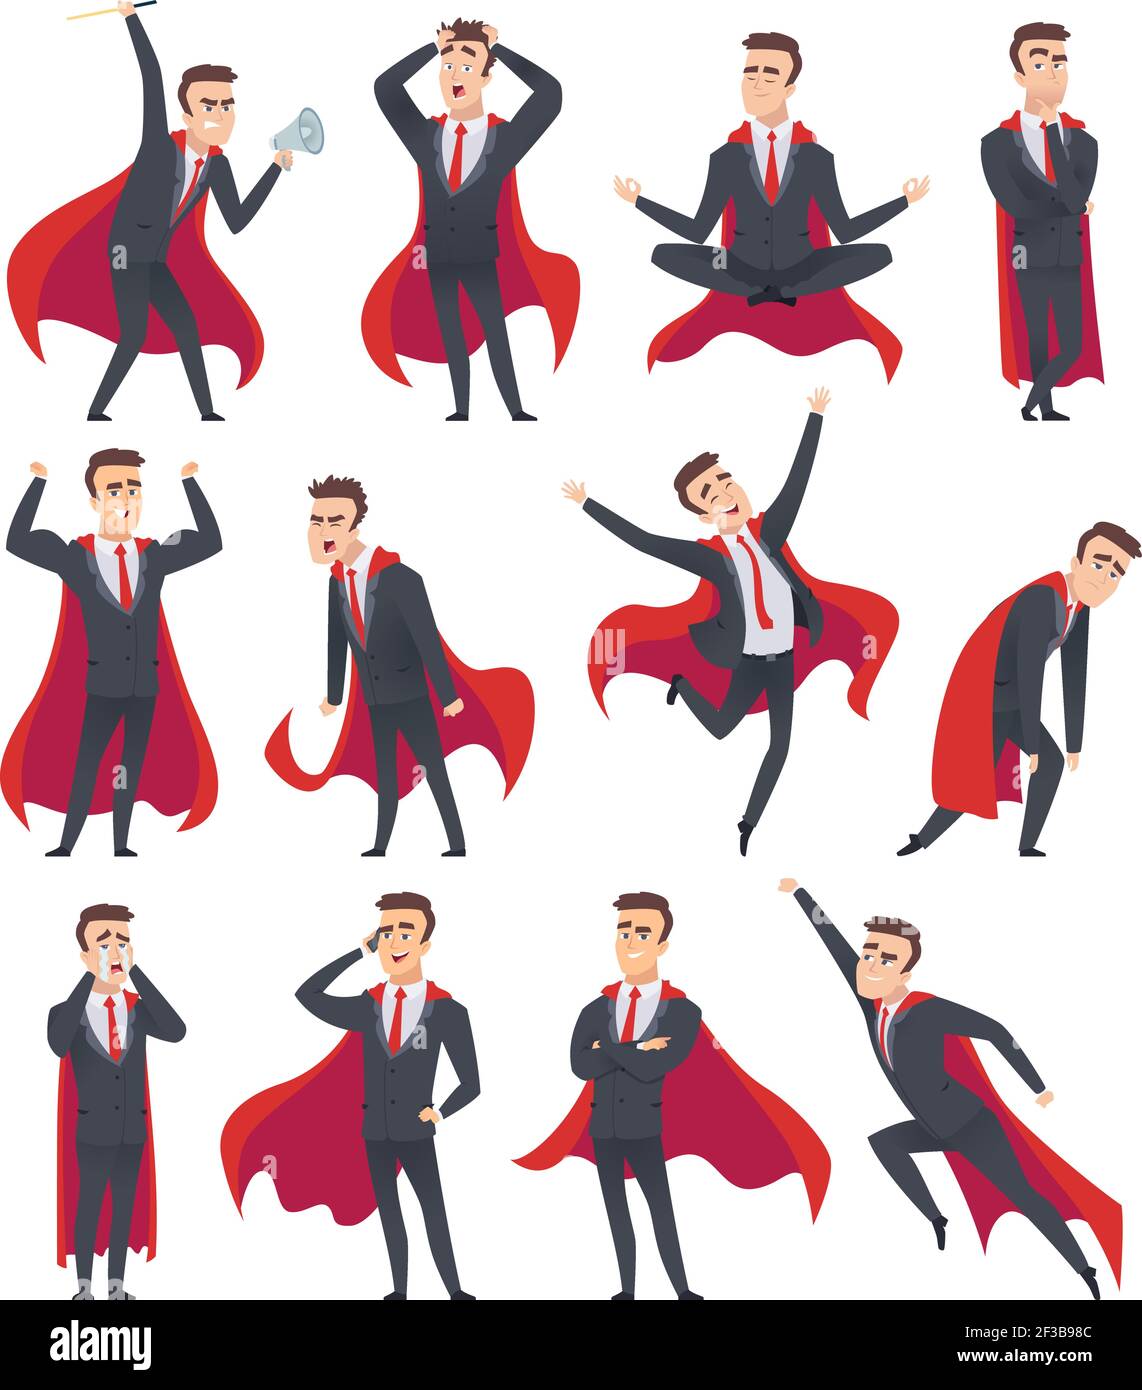 Businessman superheroes. Male characters in action poses of superheroes business person vector cartoons Stock Vector